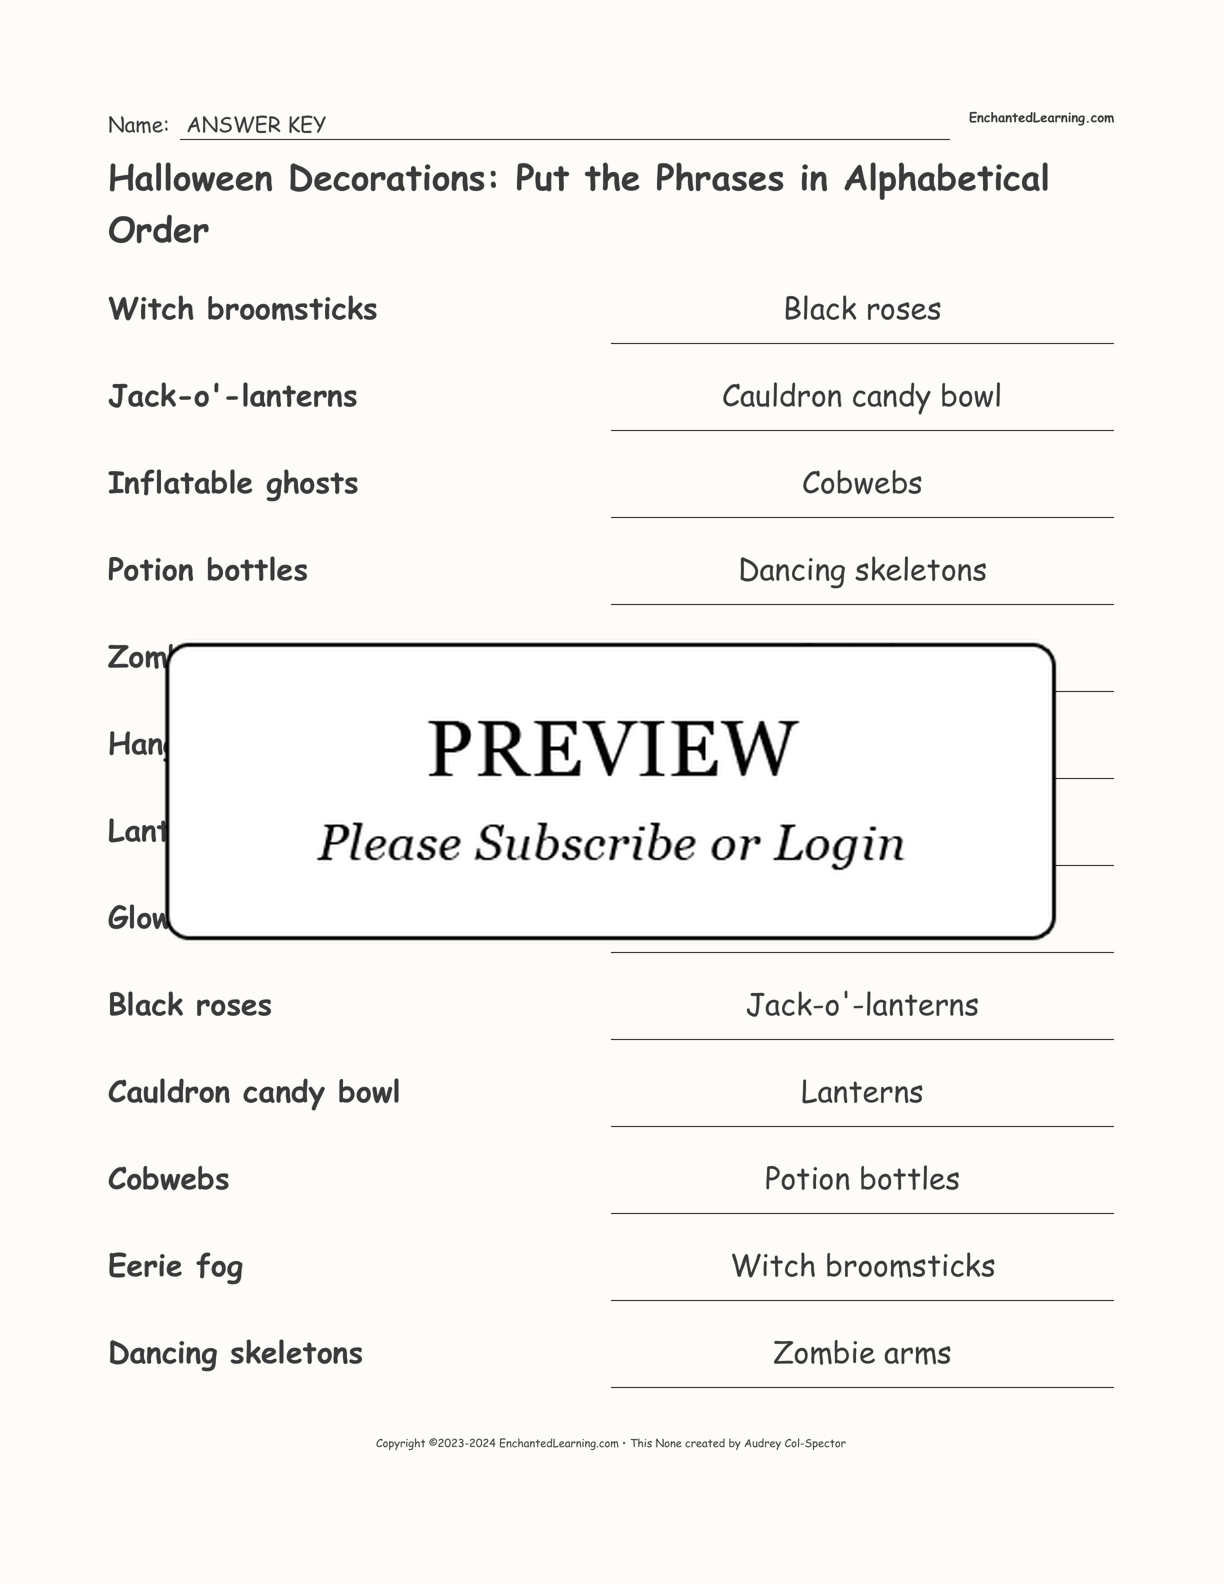 Halloween Decorations: Put the Phrases in Alphabetical Order interactive worksheet page 2